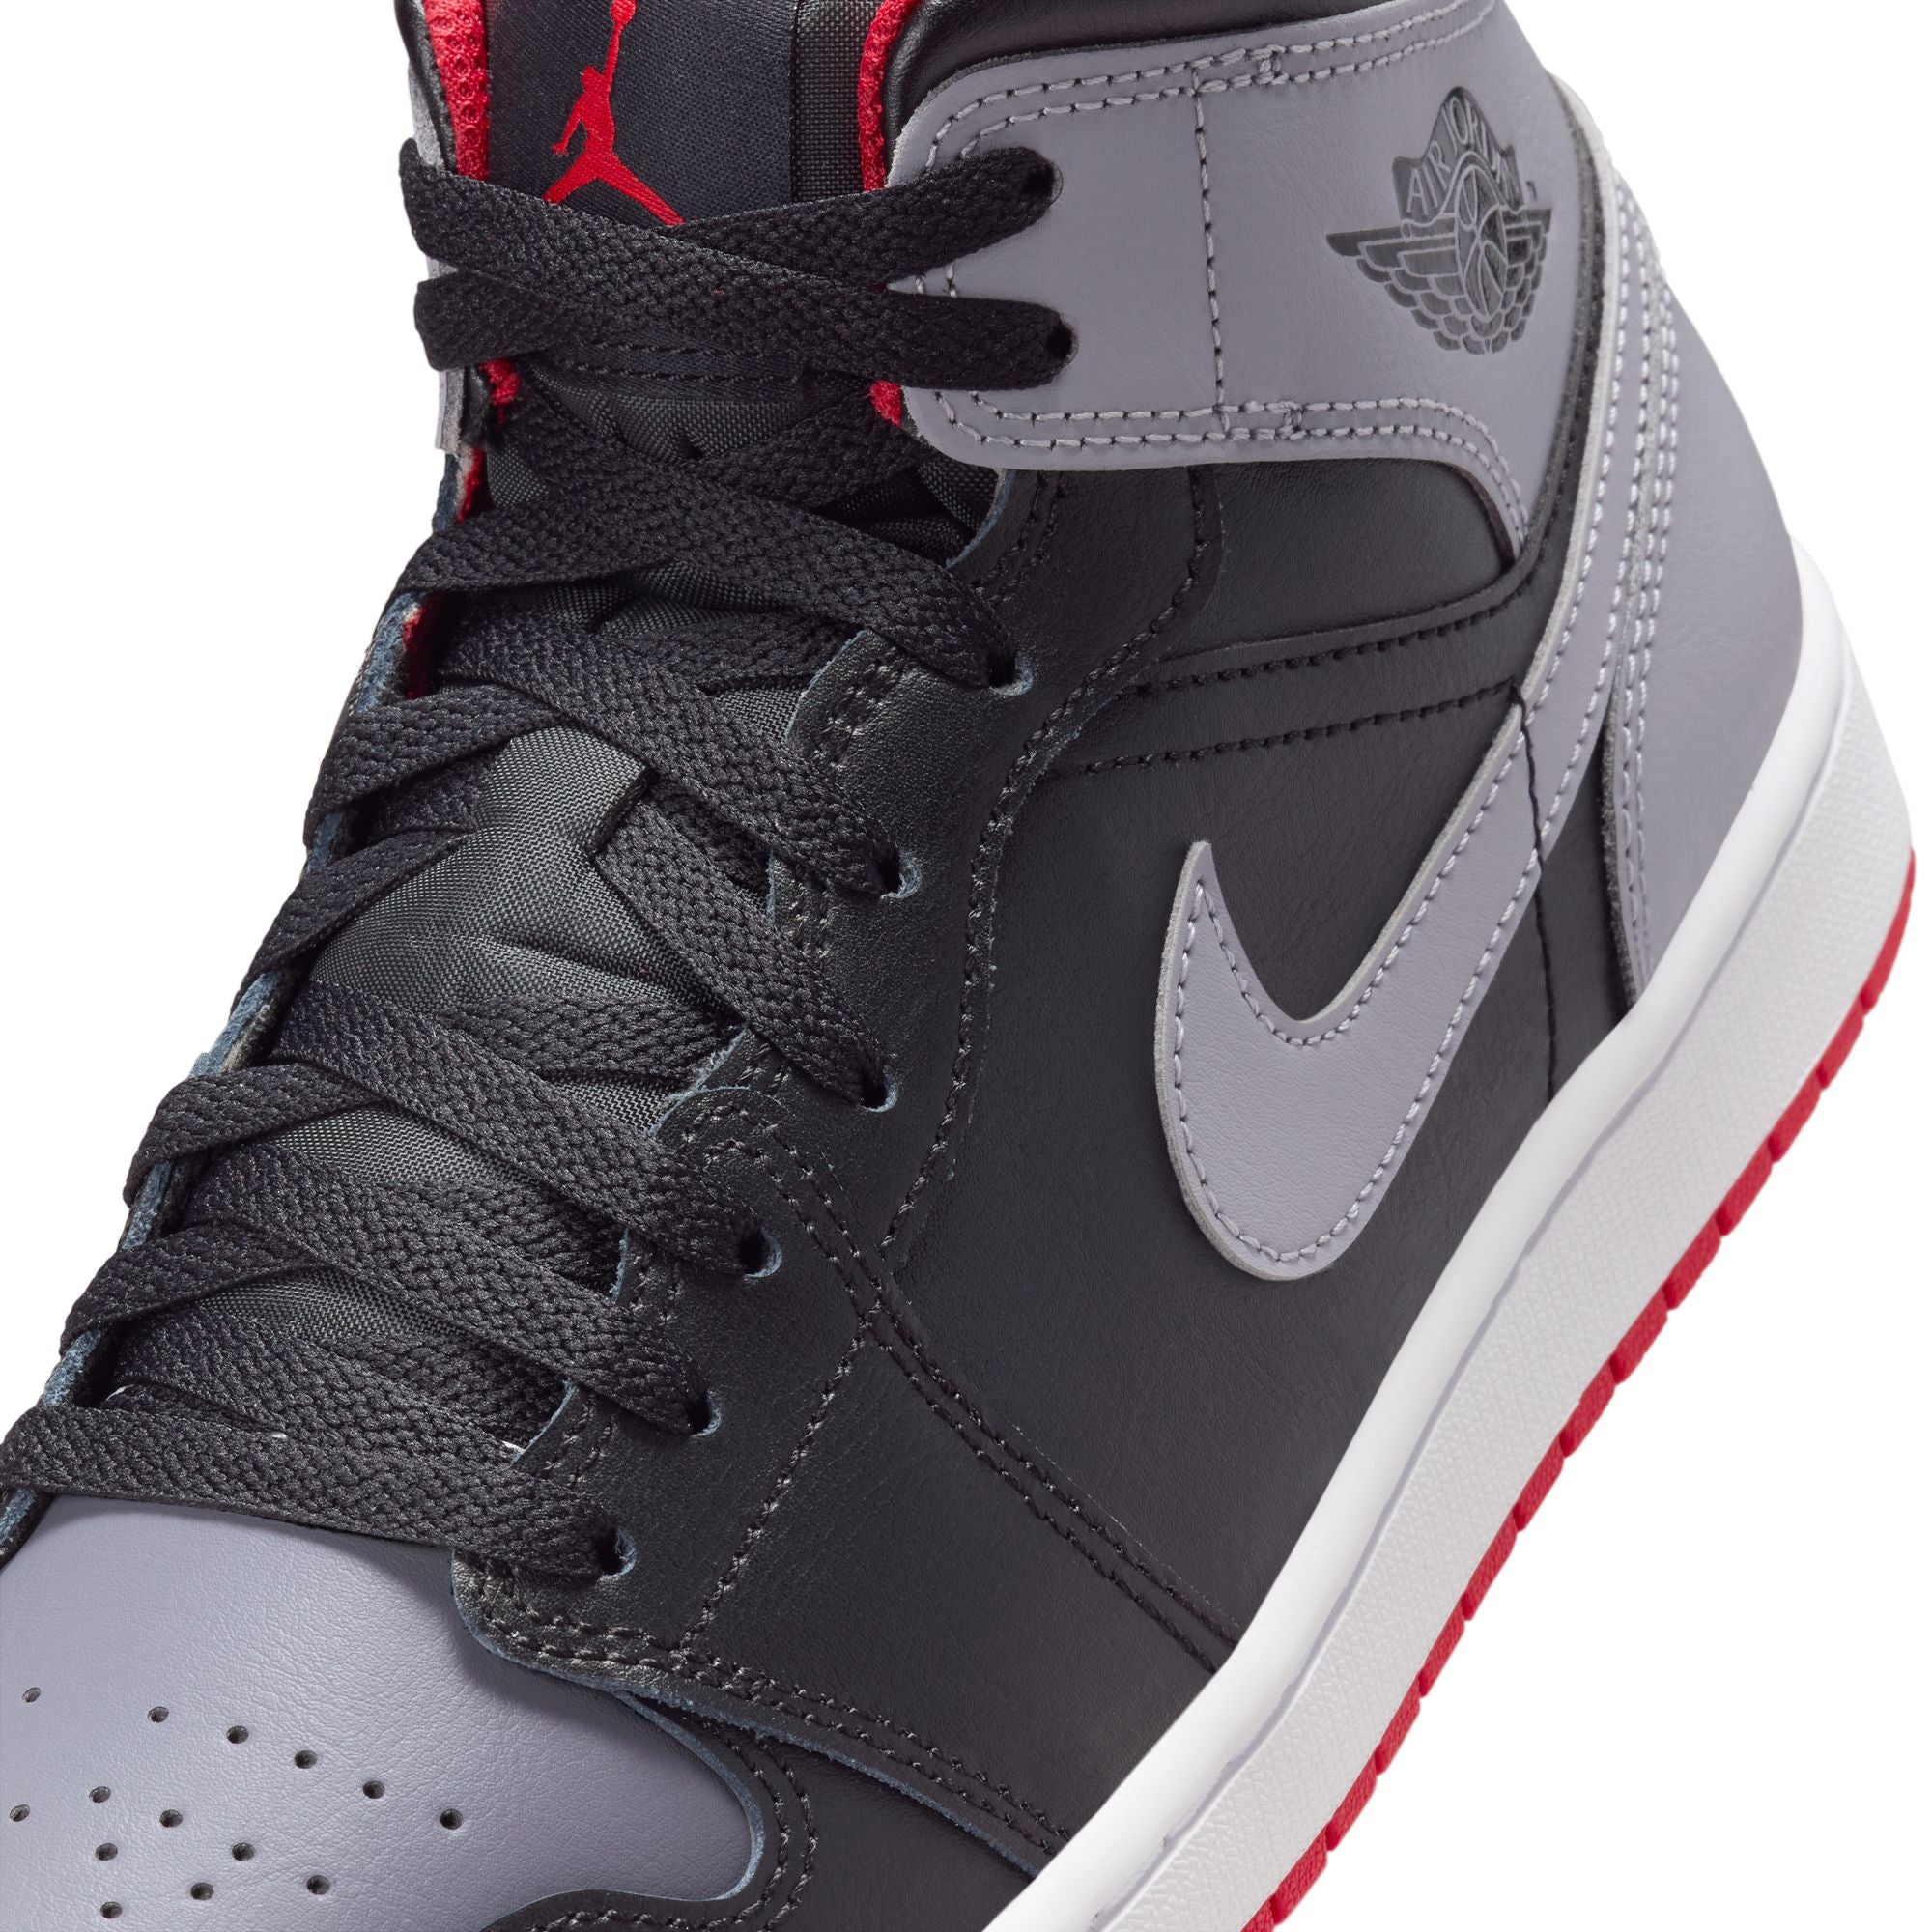 NIKE - Air Jordan 1 Mid - (Black/Cement Grey-Fire Red-Whi) view 10